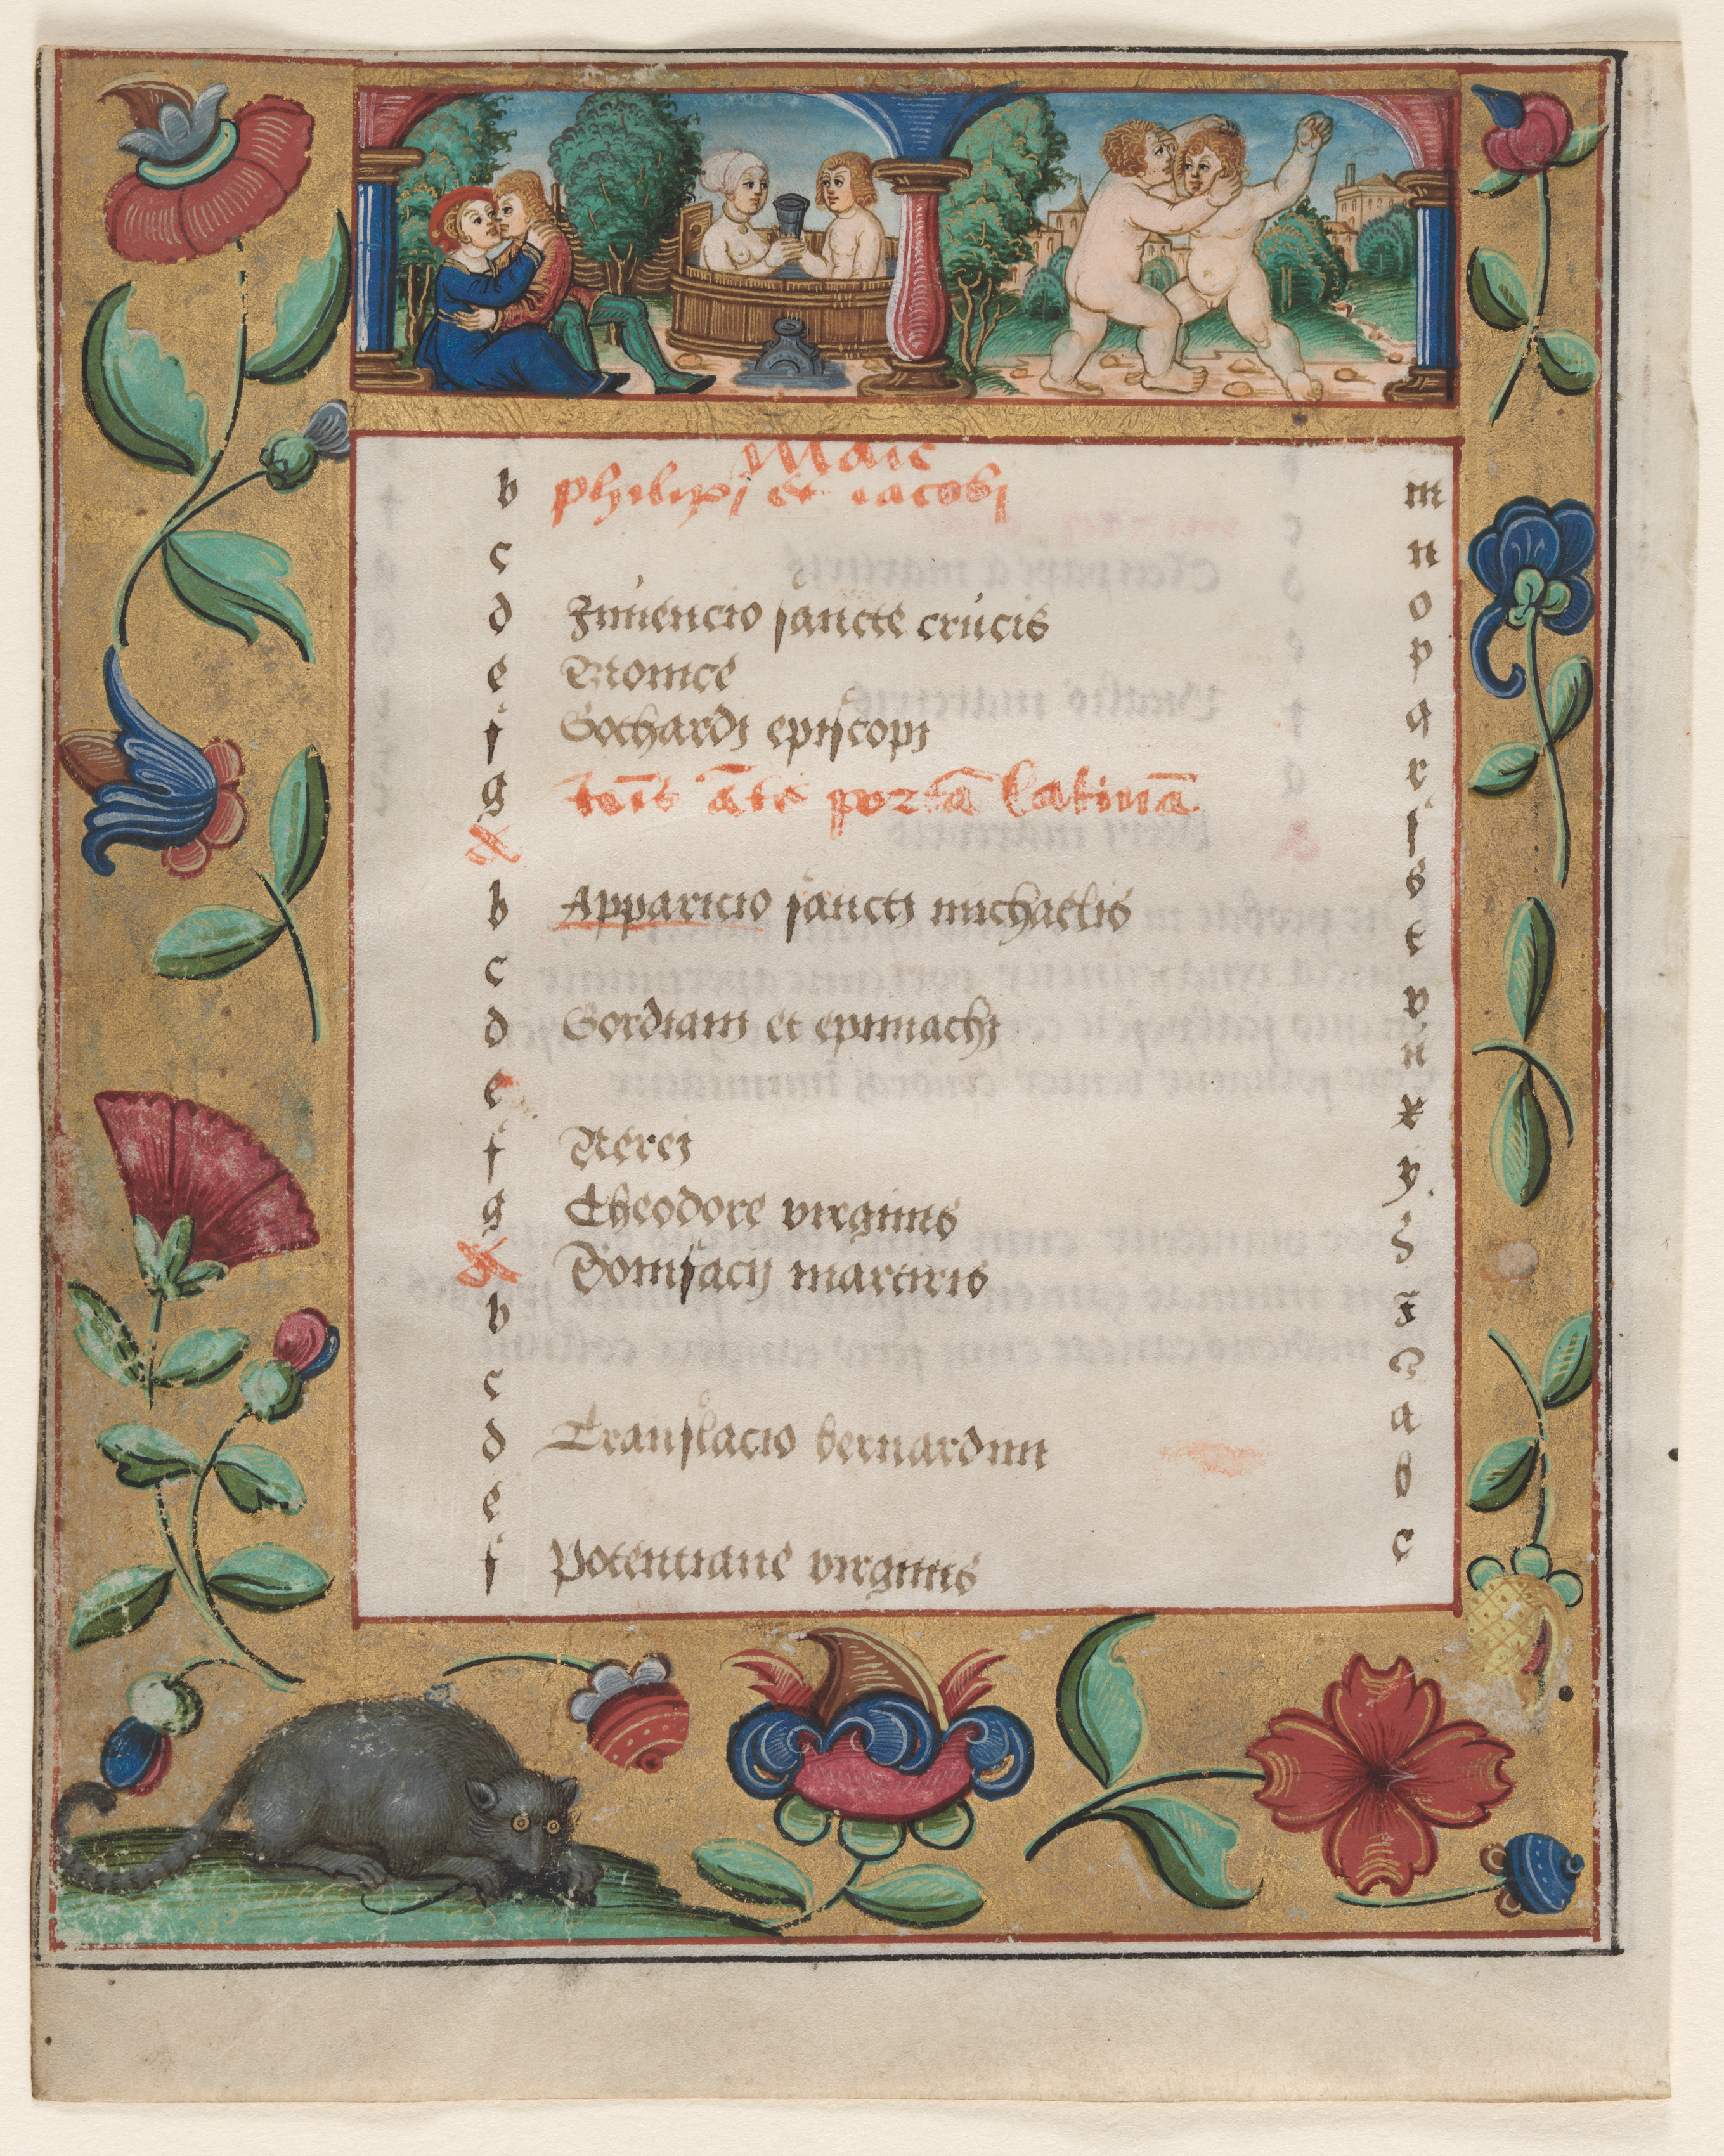 Leaf from a Psalter and Prayerbook: Calendar Page with Labors (recto)